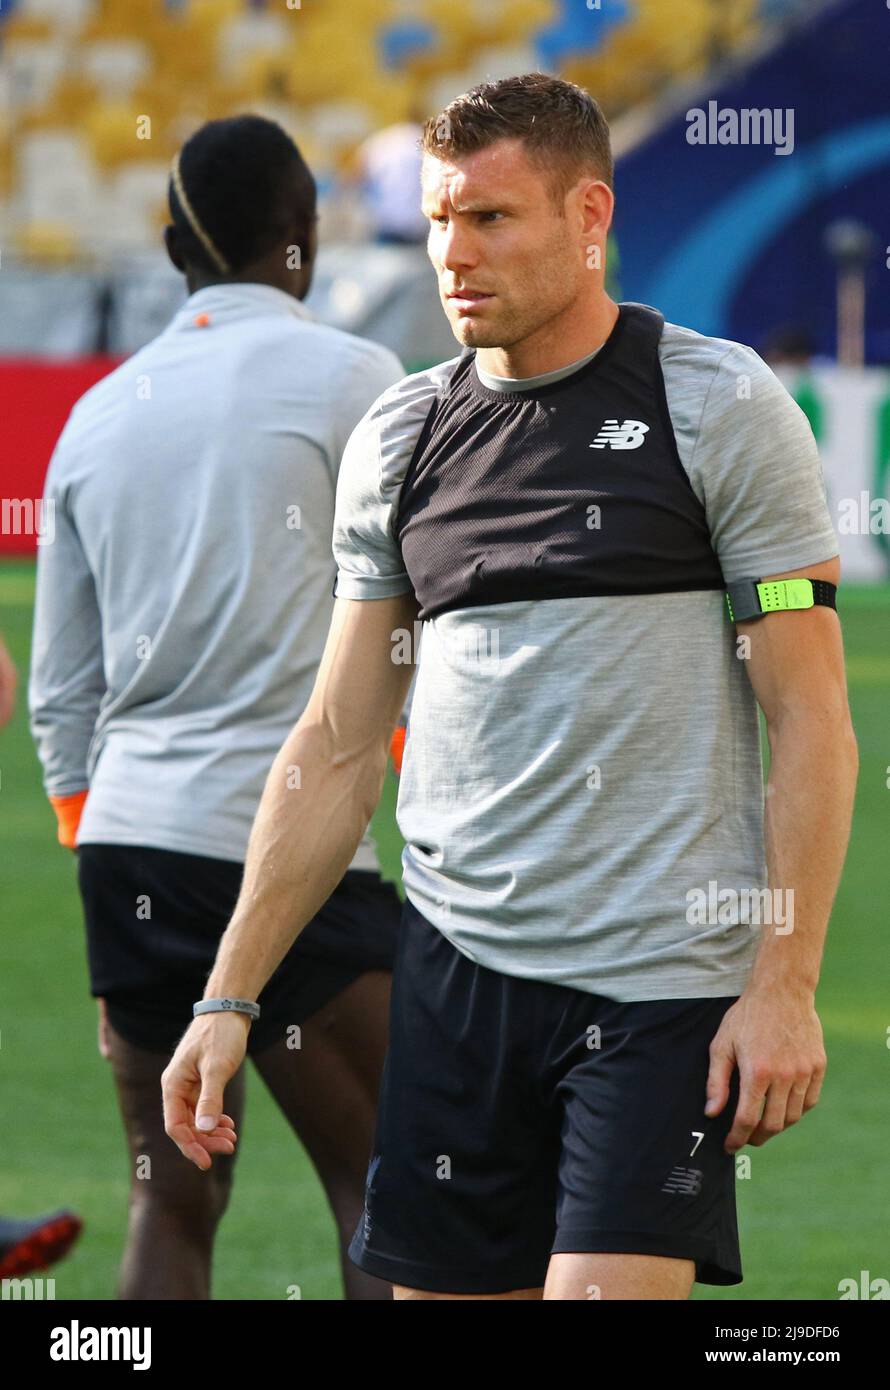 KYIV, UKRAINE - MAY 25, 2018: James Milner of Liverpool in action during training session before the UEFA Champions League Final 2018 game against Real Madrid in Kyiv, Ukraine Stock Photo